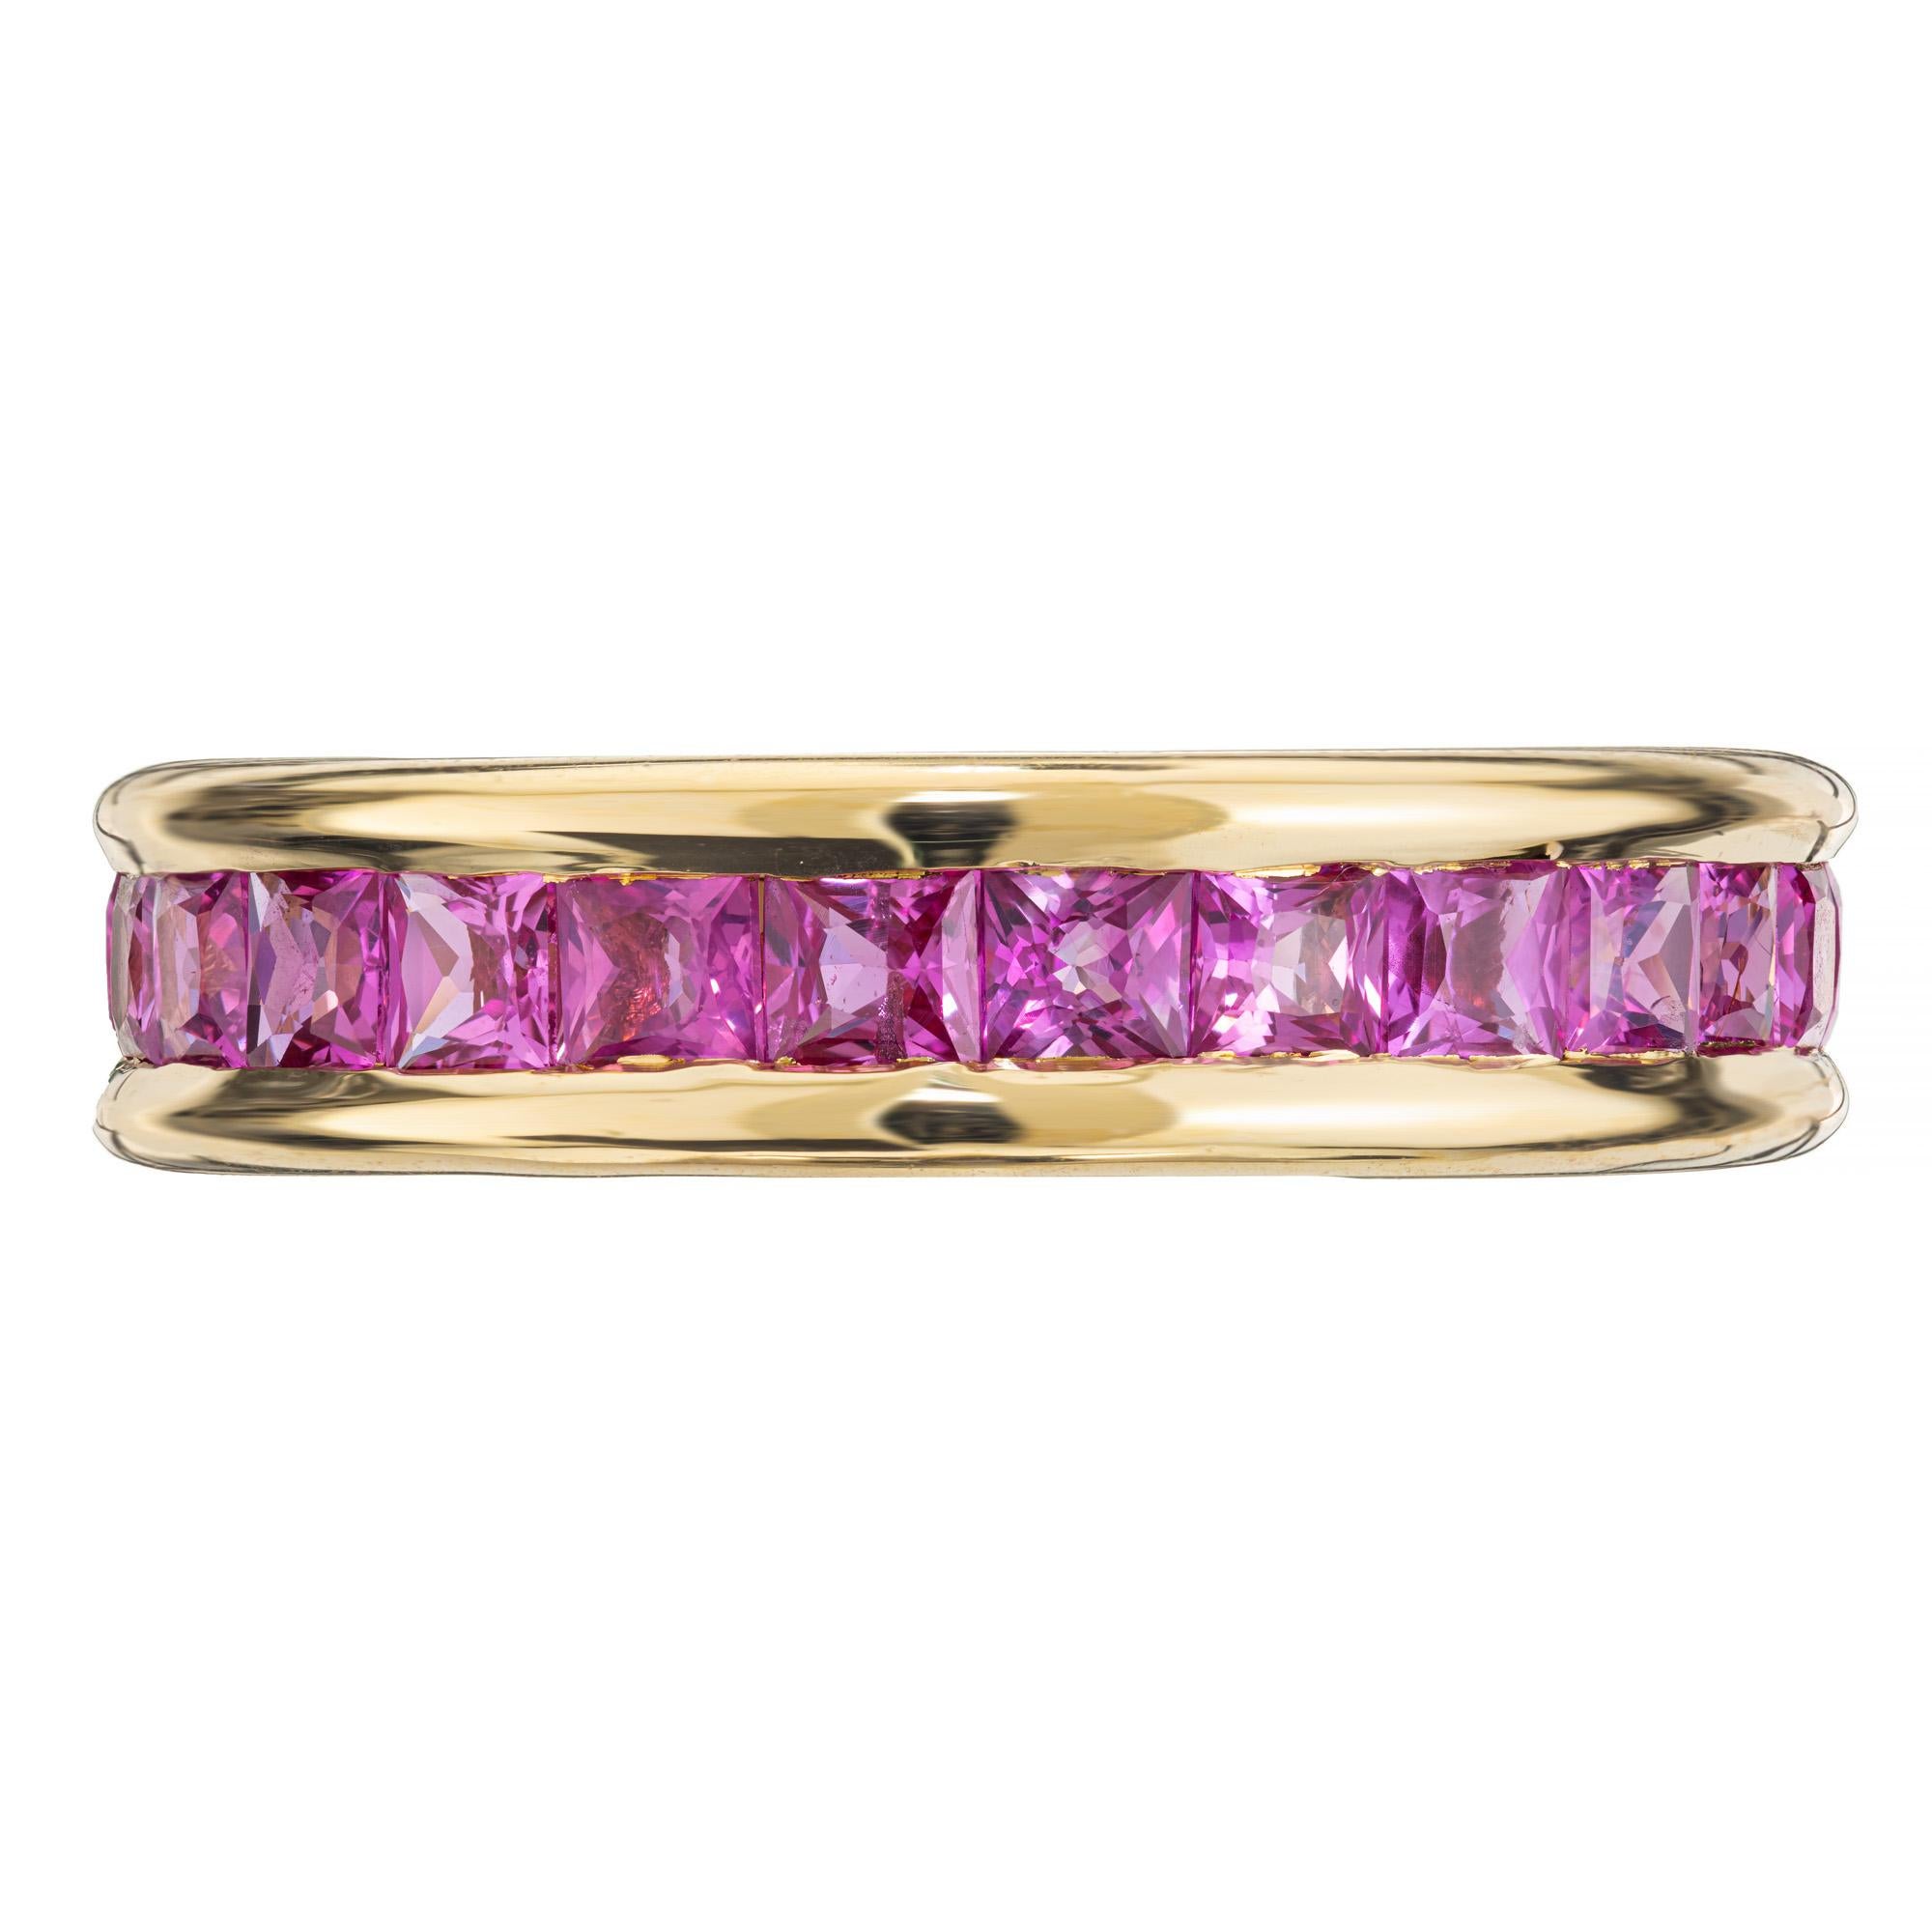 Beautiful pink sapphire wedding band ring. 18k yellow gold eternity setting with 25 channel set square cut rich pink sapphires totaling 3.75cts. The mix of pink sapphires and yellow gold makes it a spectacular piece. Please note this ring is not